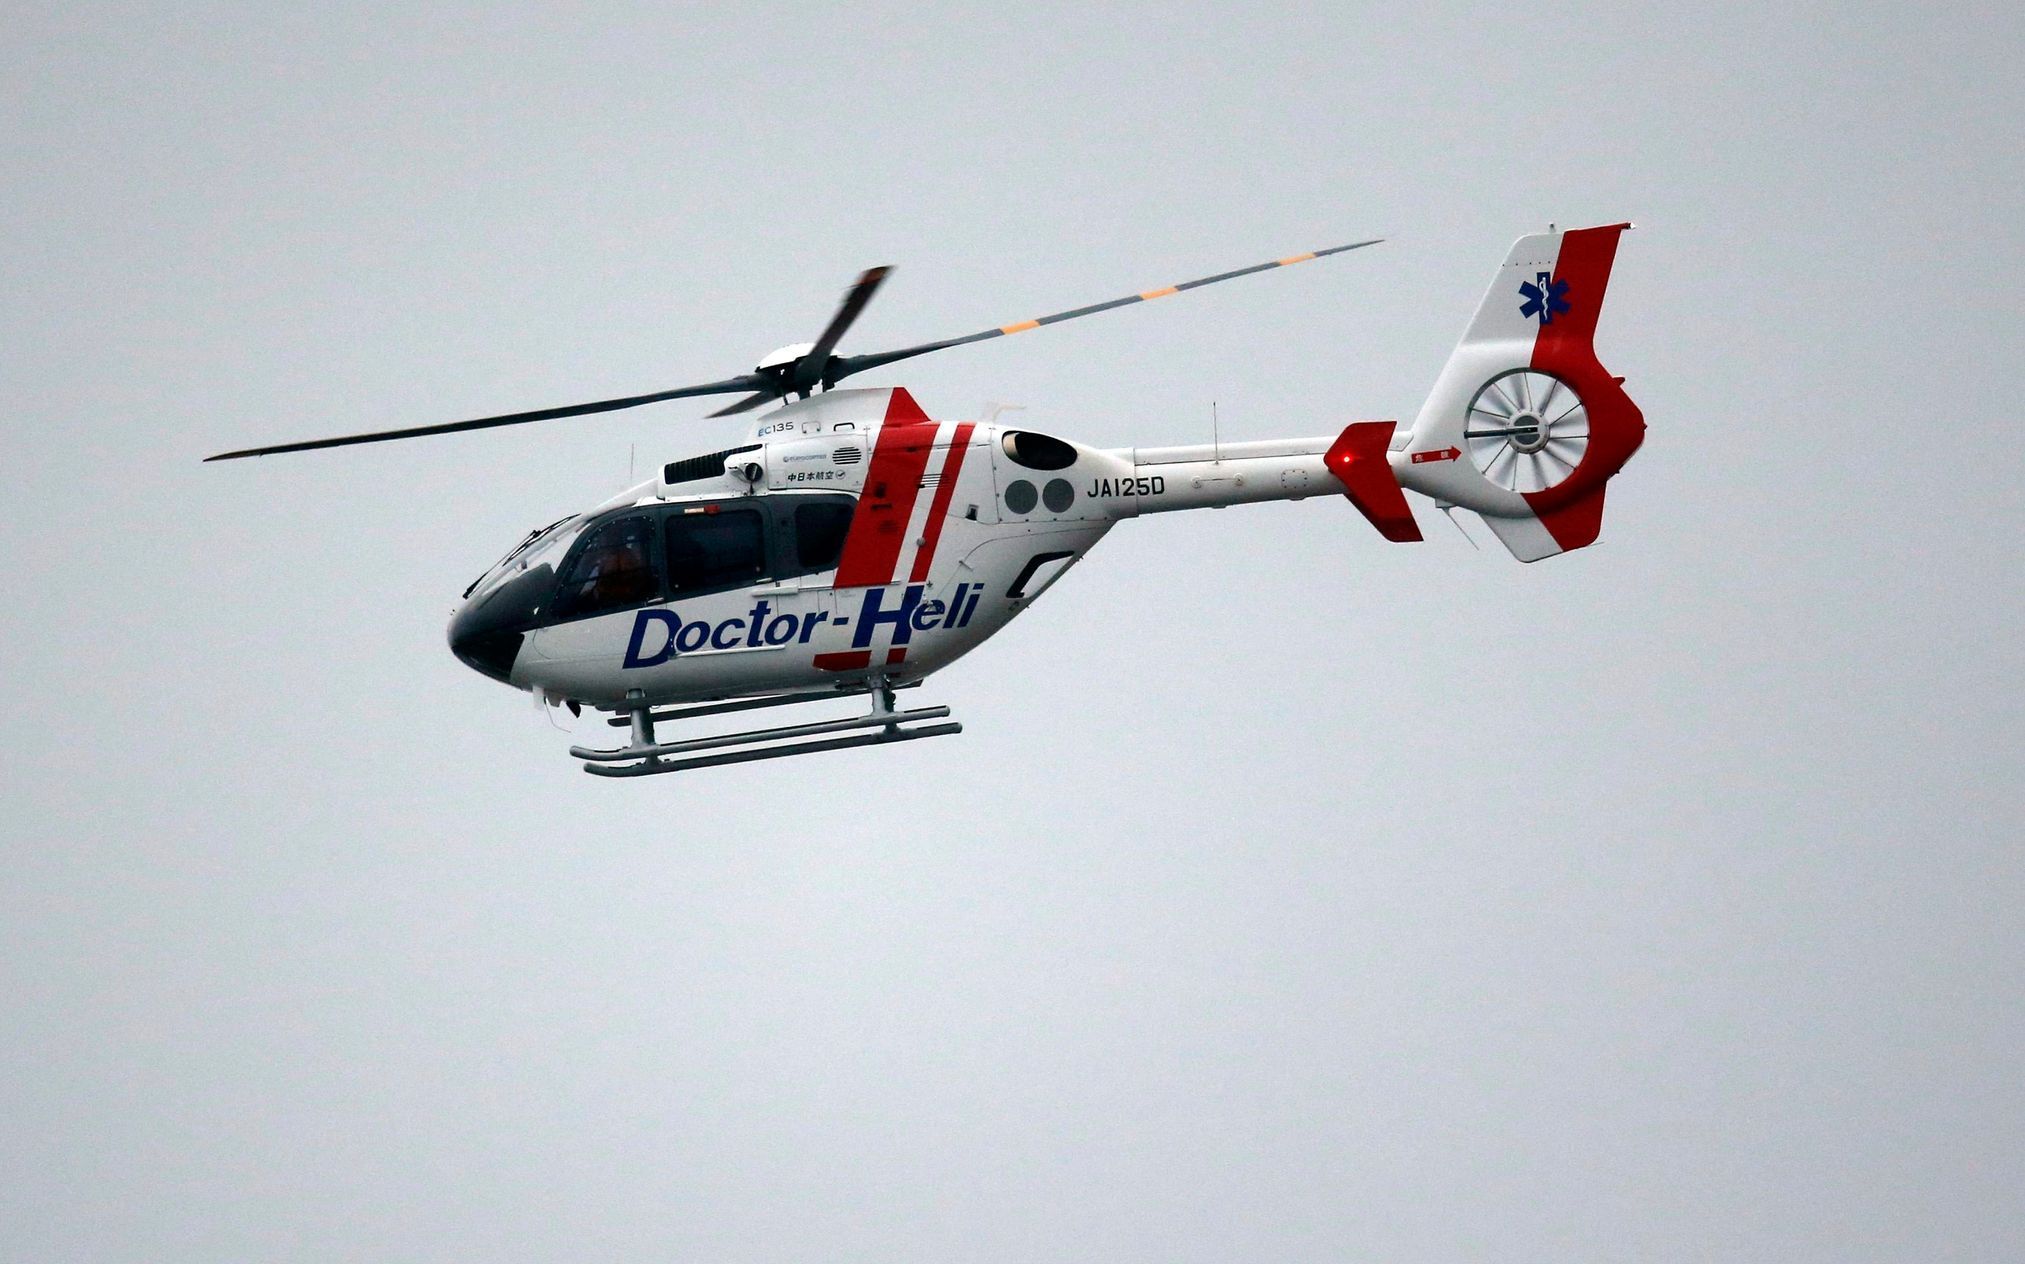 A medical evacuation helicopter takes to the air after the race was stopped following a crash by Marussia Formula One driver Jules Bianchi of France at the Japanese F1 Grand Prix at the Suzuka Circuit